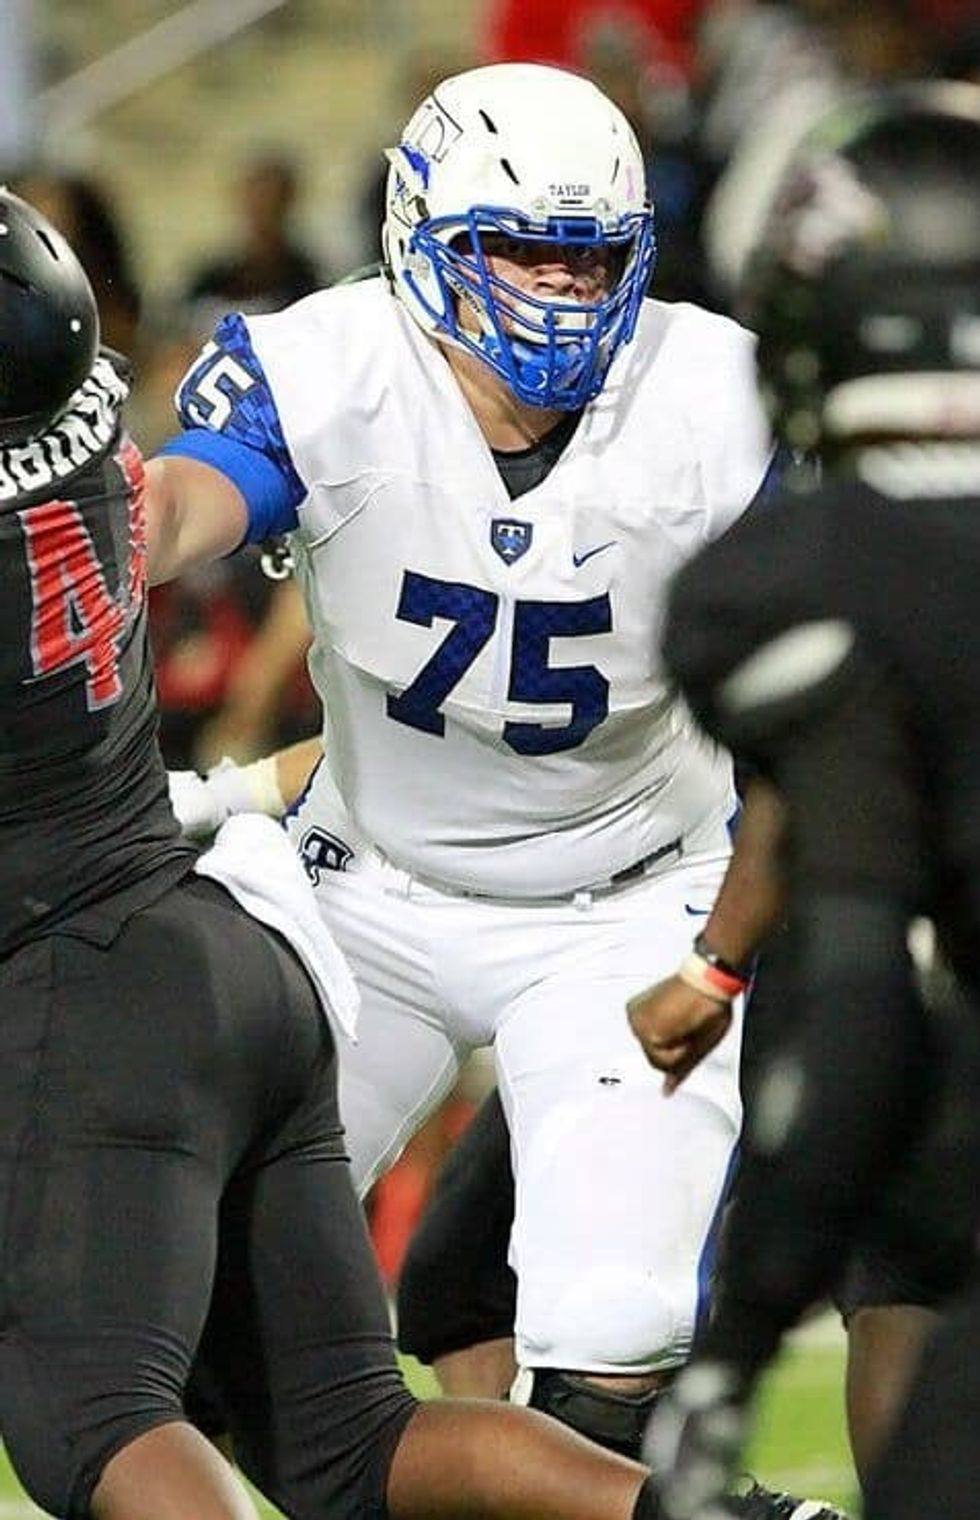 Katy Taylor OL Hayden Conner is the “Next Big Thing”